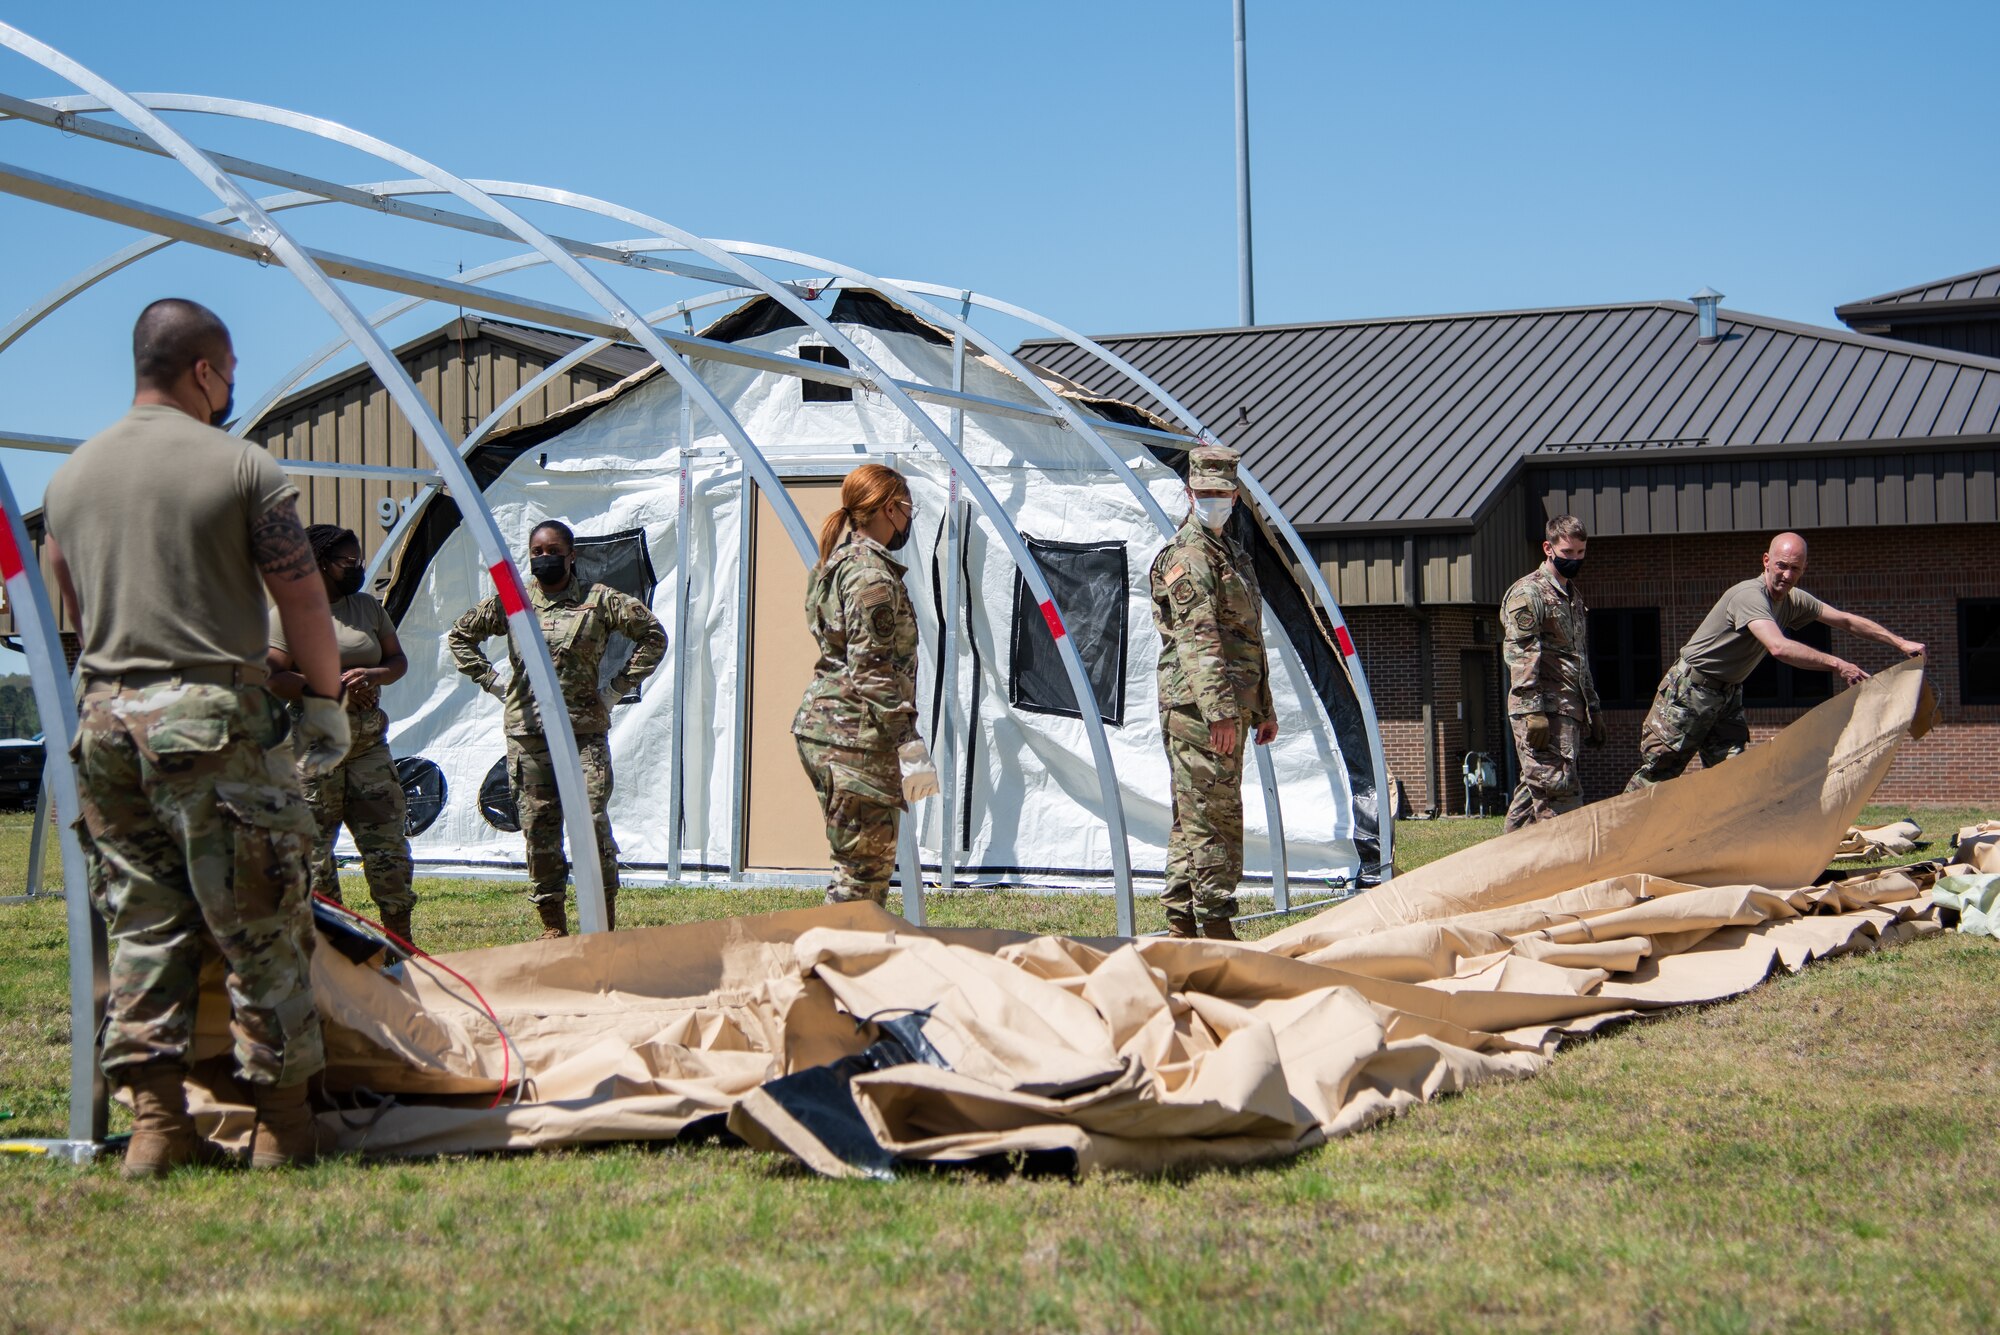 Reserve Citizen Airmen of the 913th Force Support Squadron organize the canvas material to build up an Alaska tent during the 4-day unit training assembly, April 8, 2021, a Little Rock Air Force Base, Arkansas. The tent is commonly used during deployments and the training was one of many sessions that took place to ensure personnel are ready to deploy and operate in dynamic, austere environments. (U.S. Air Force photo by Senior Airman Kalee Sexton)